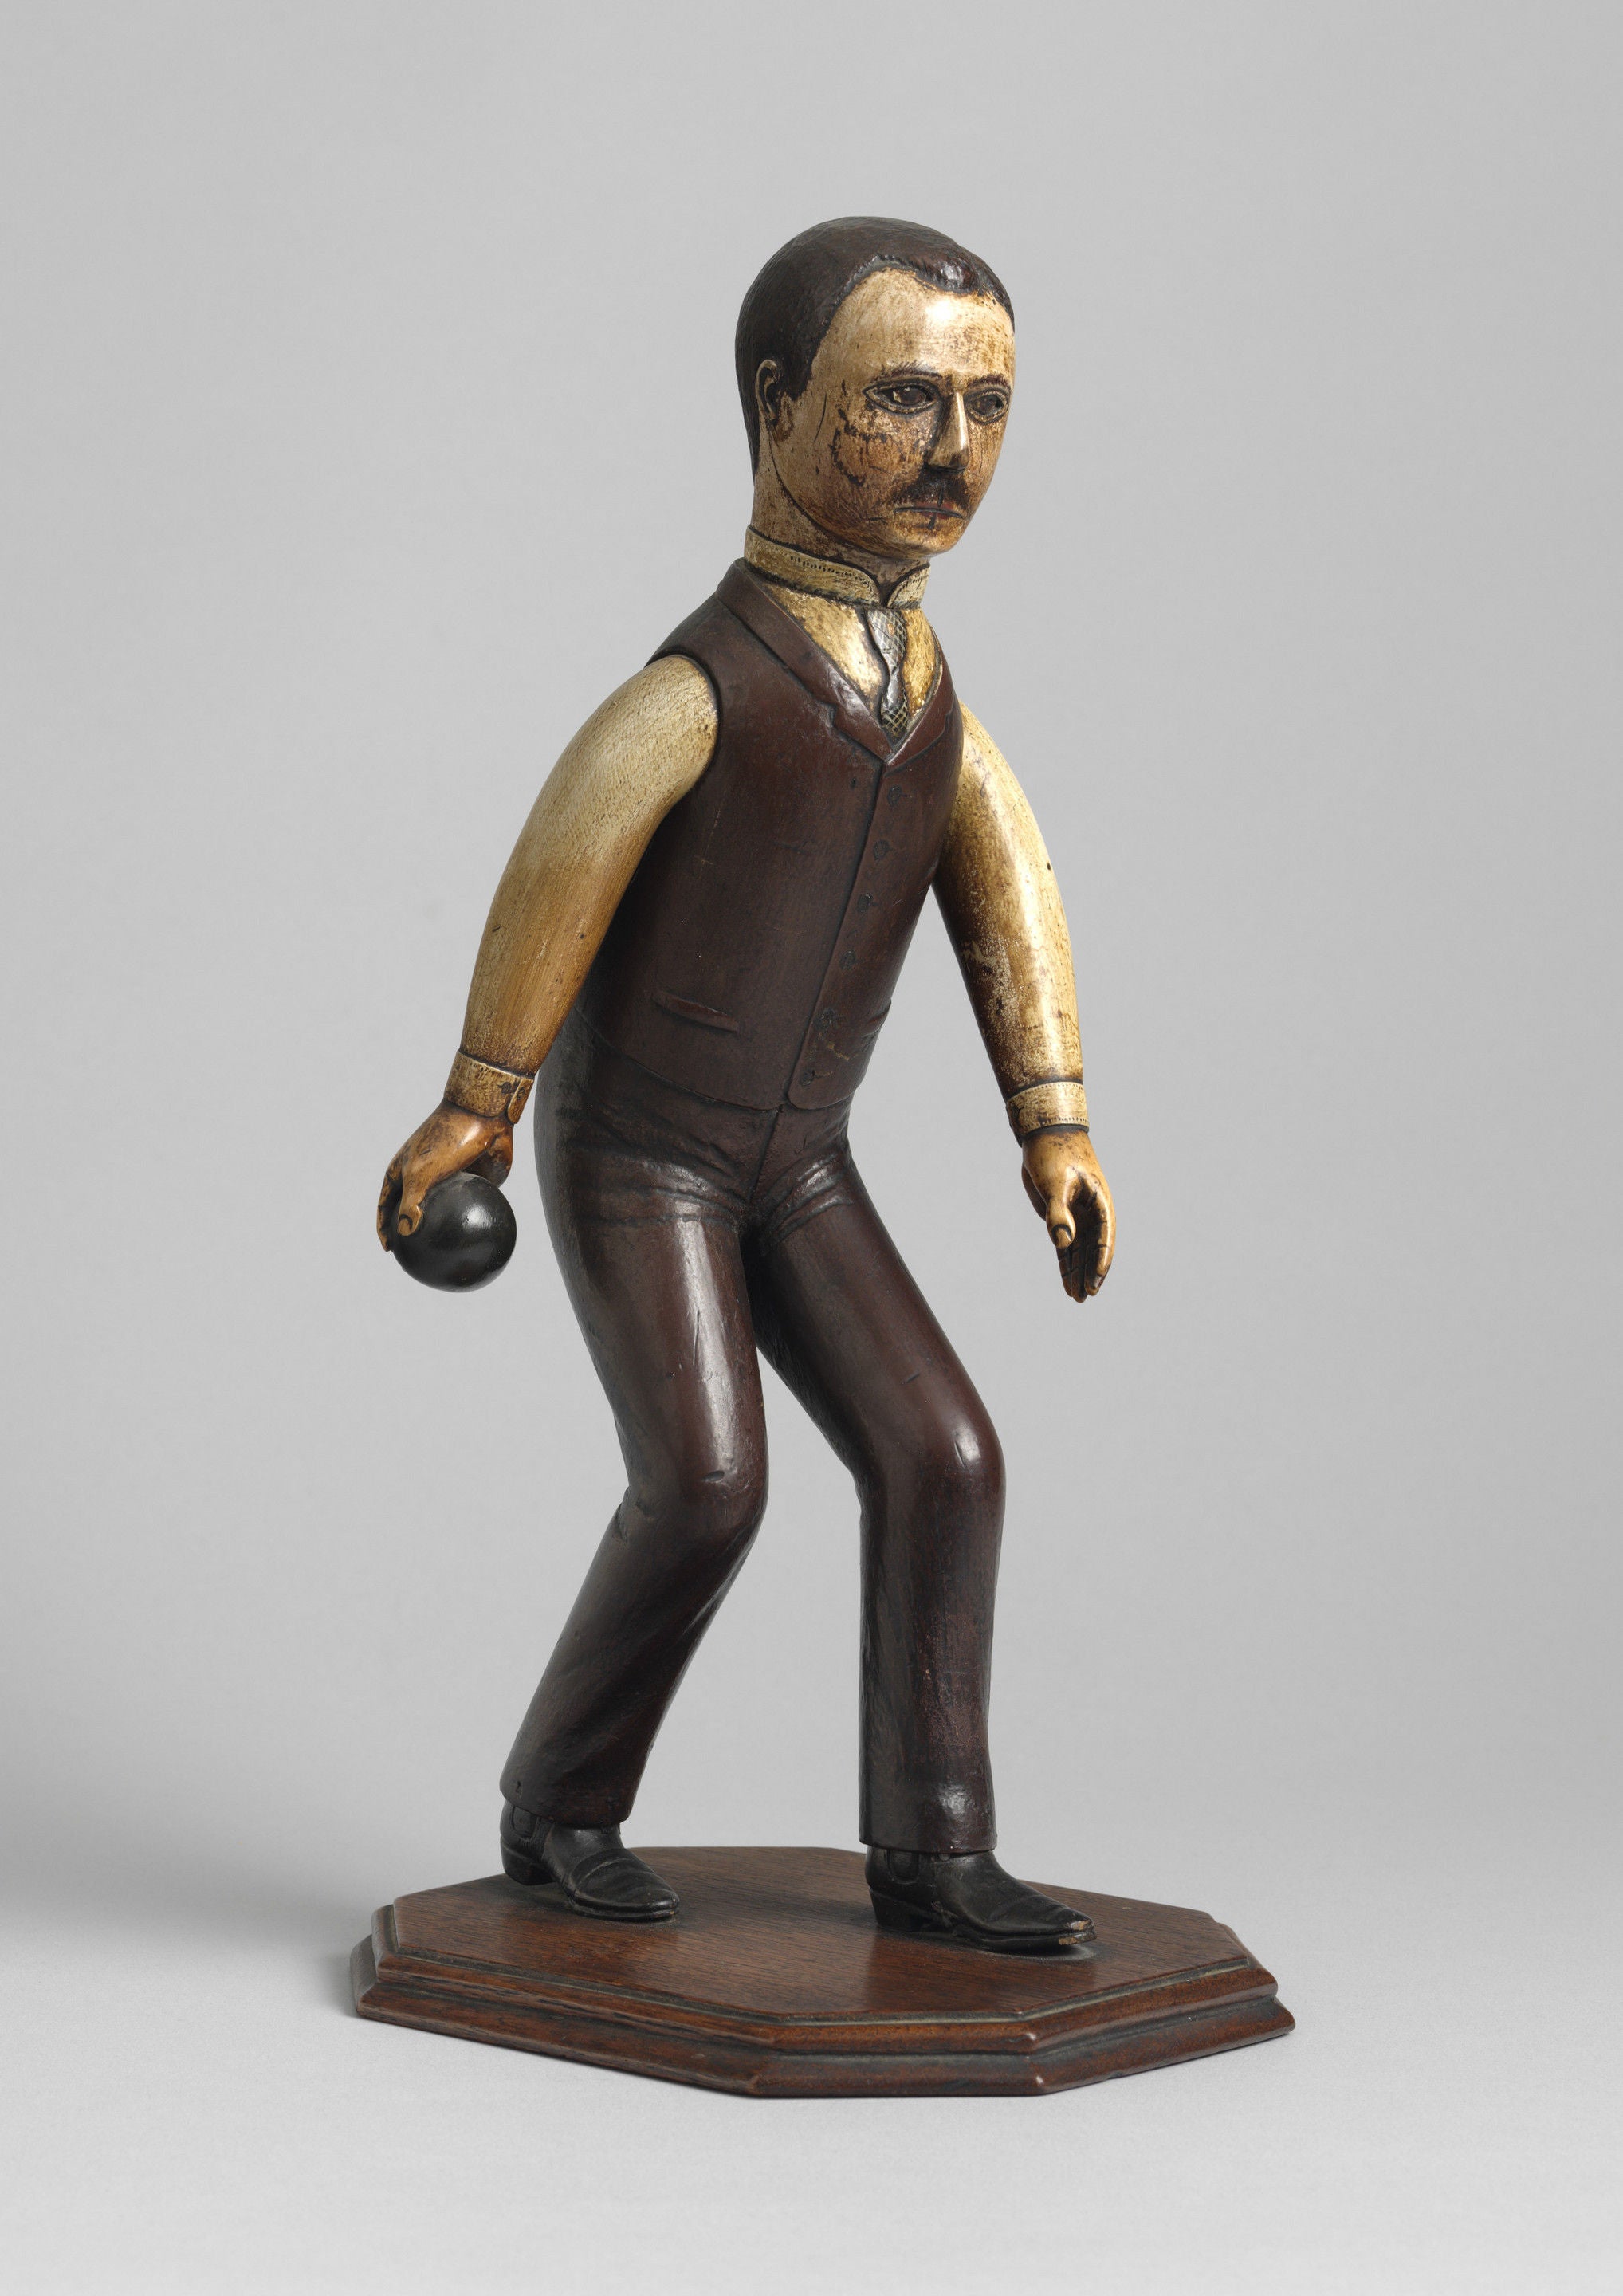 Unusual and Engaging Folk Art Sculpture Of A Man Playing Bowls